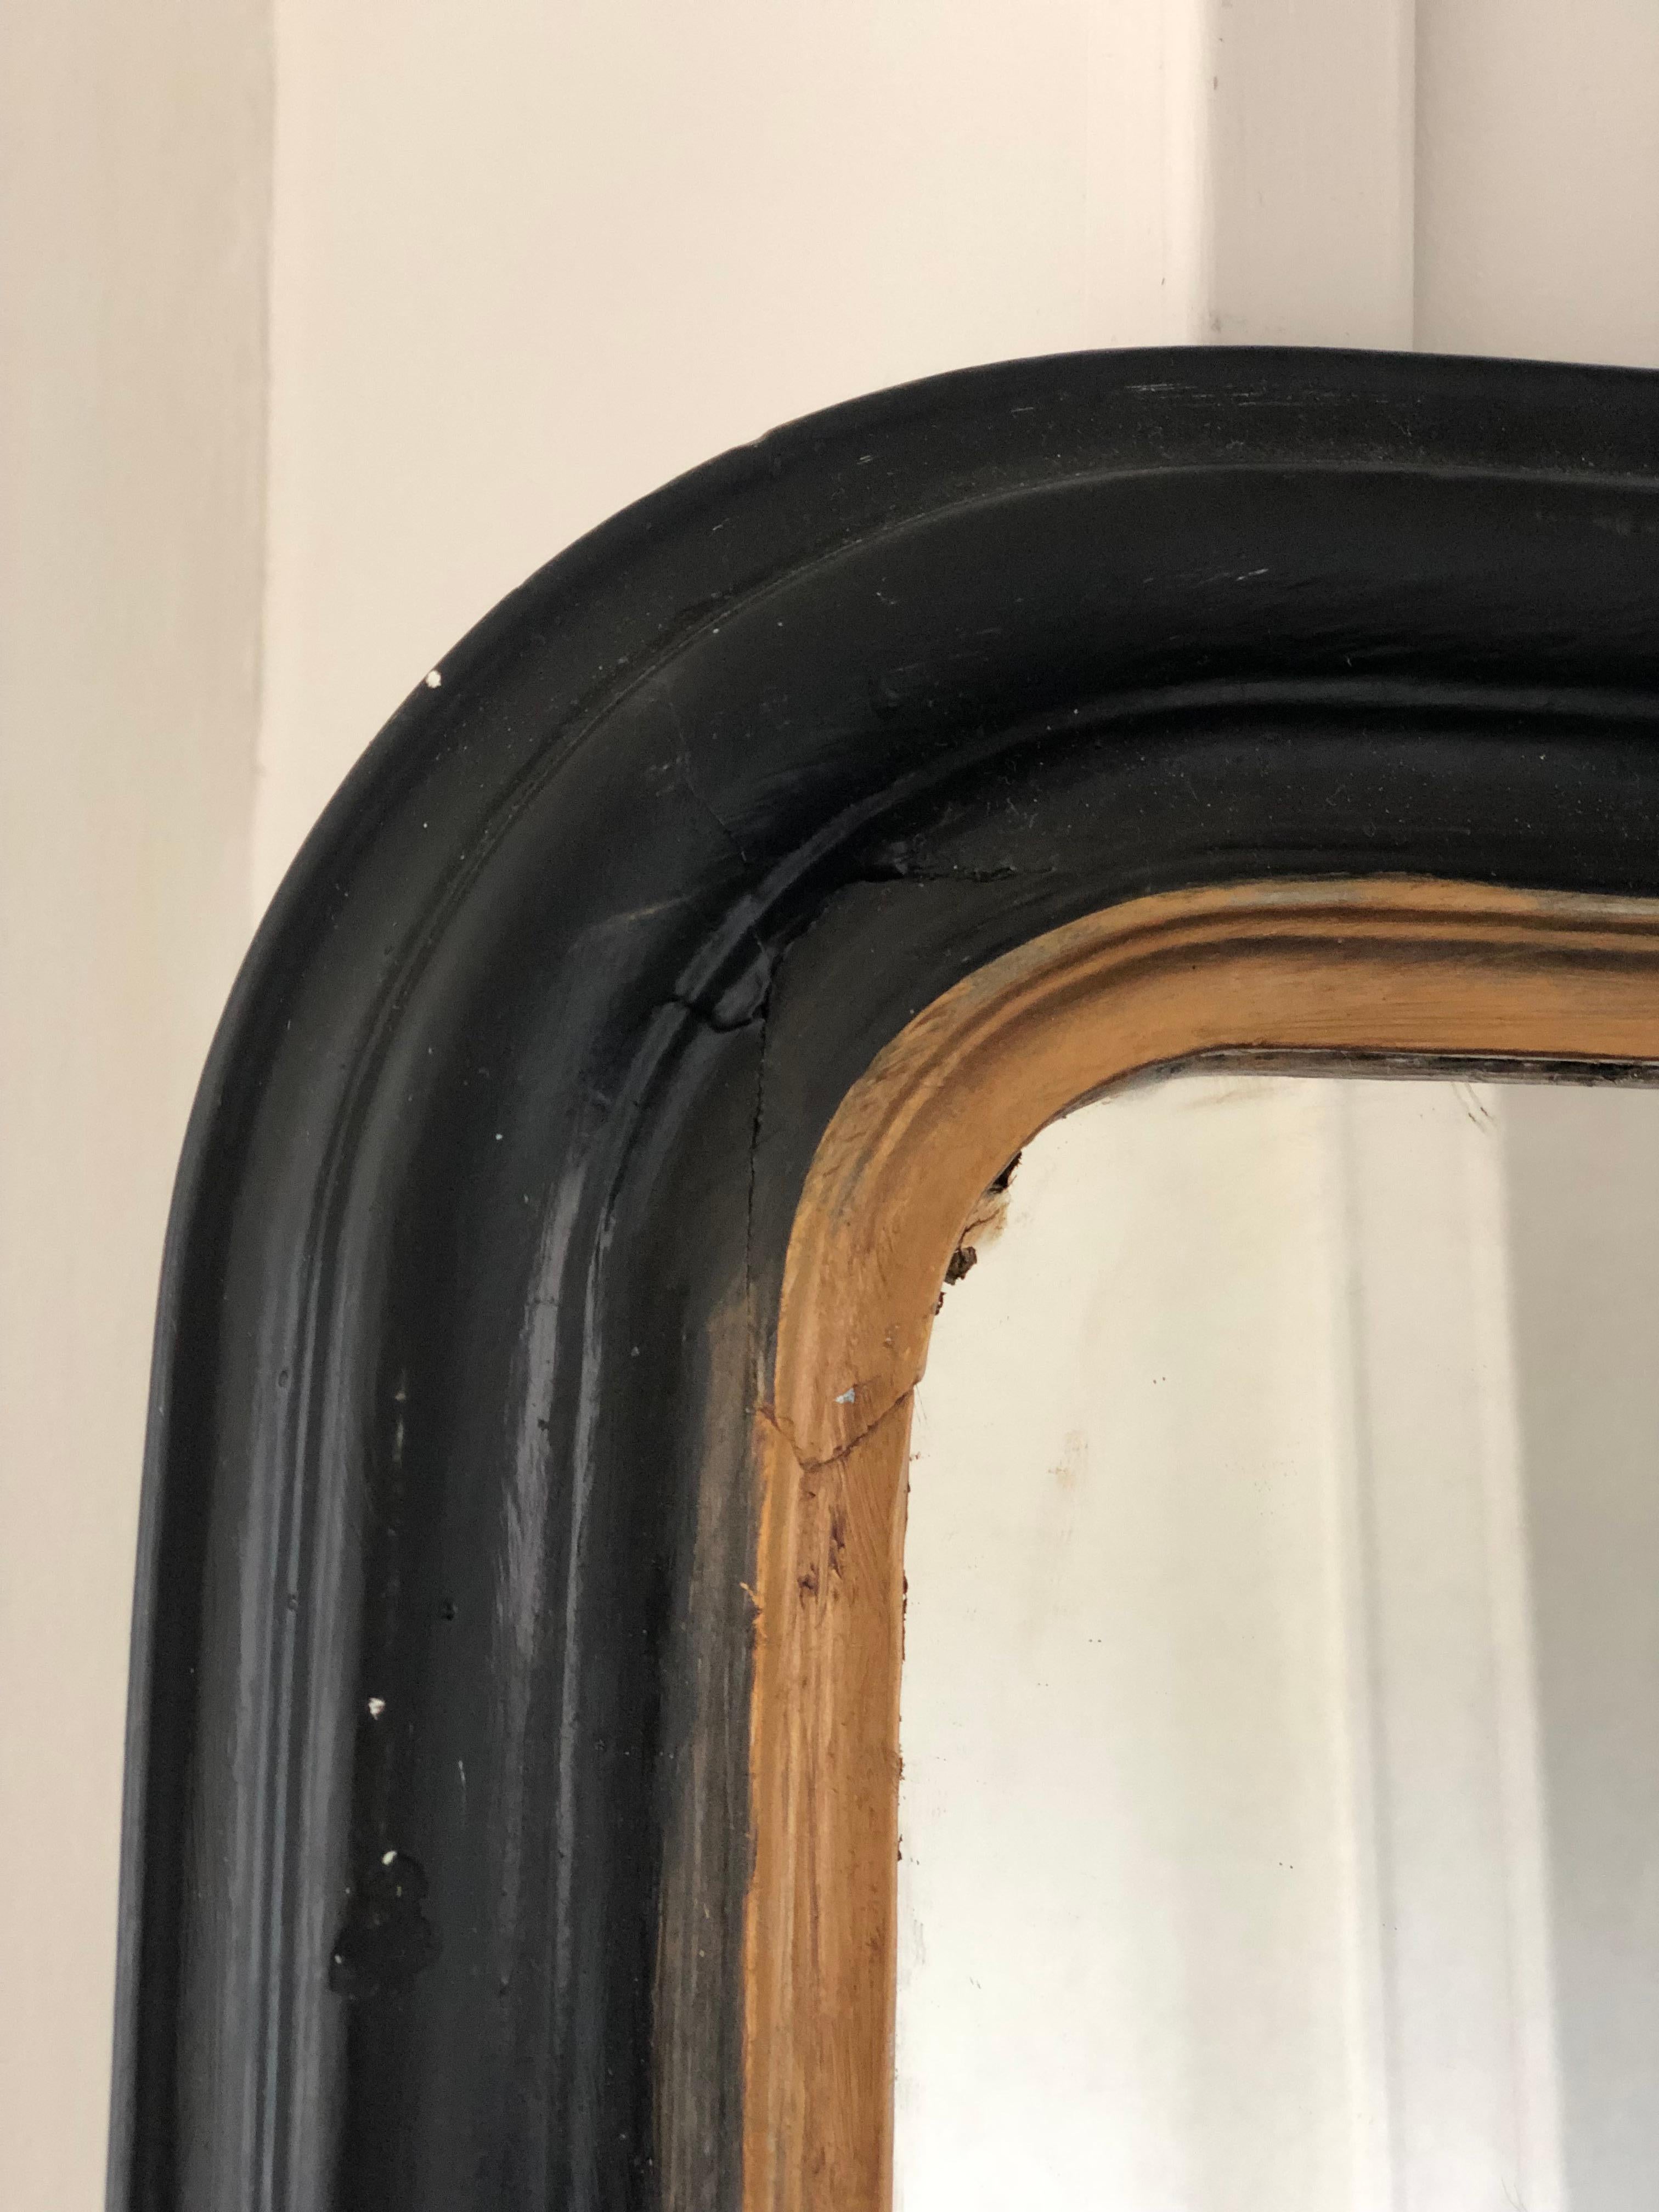 19th Century giltwood Louis Philippe mirror in black and gold with curved top corners. Original mercury glass and back.

Beautifully weathered mirror In good condition. France, Late 19th Century.

Object: Mirror
Designer: Unknown
Style: Antique,